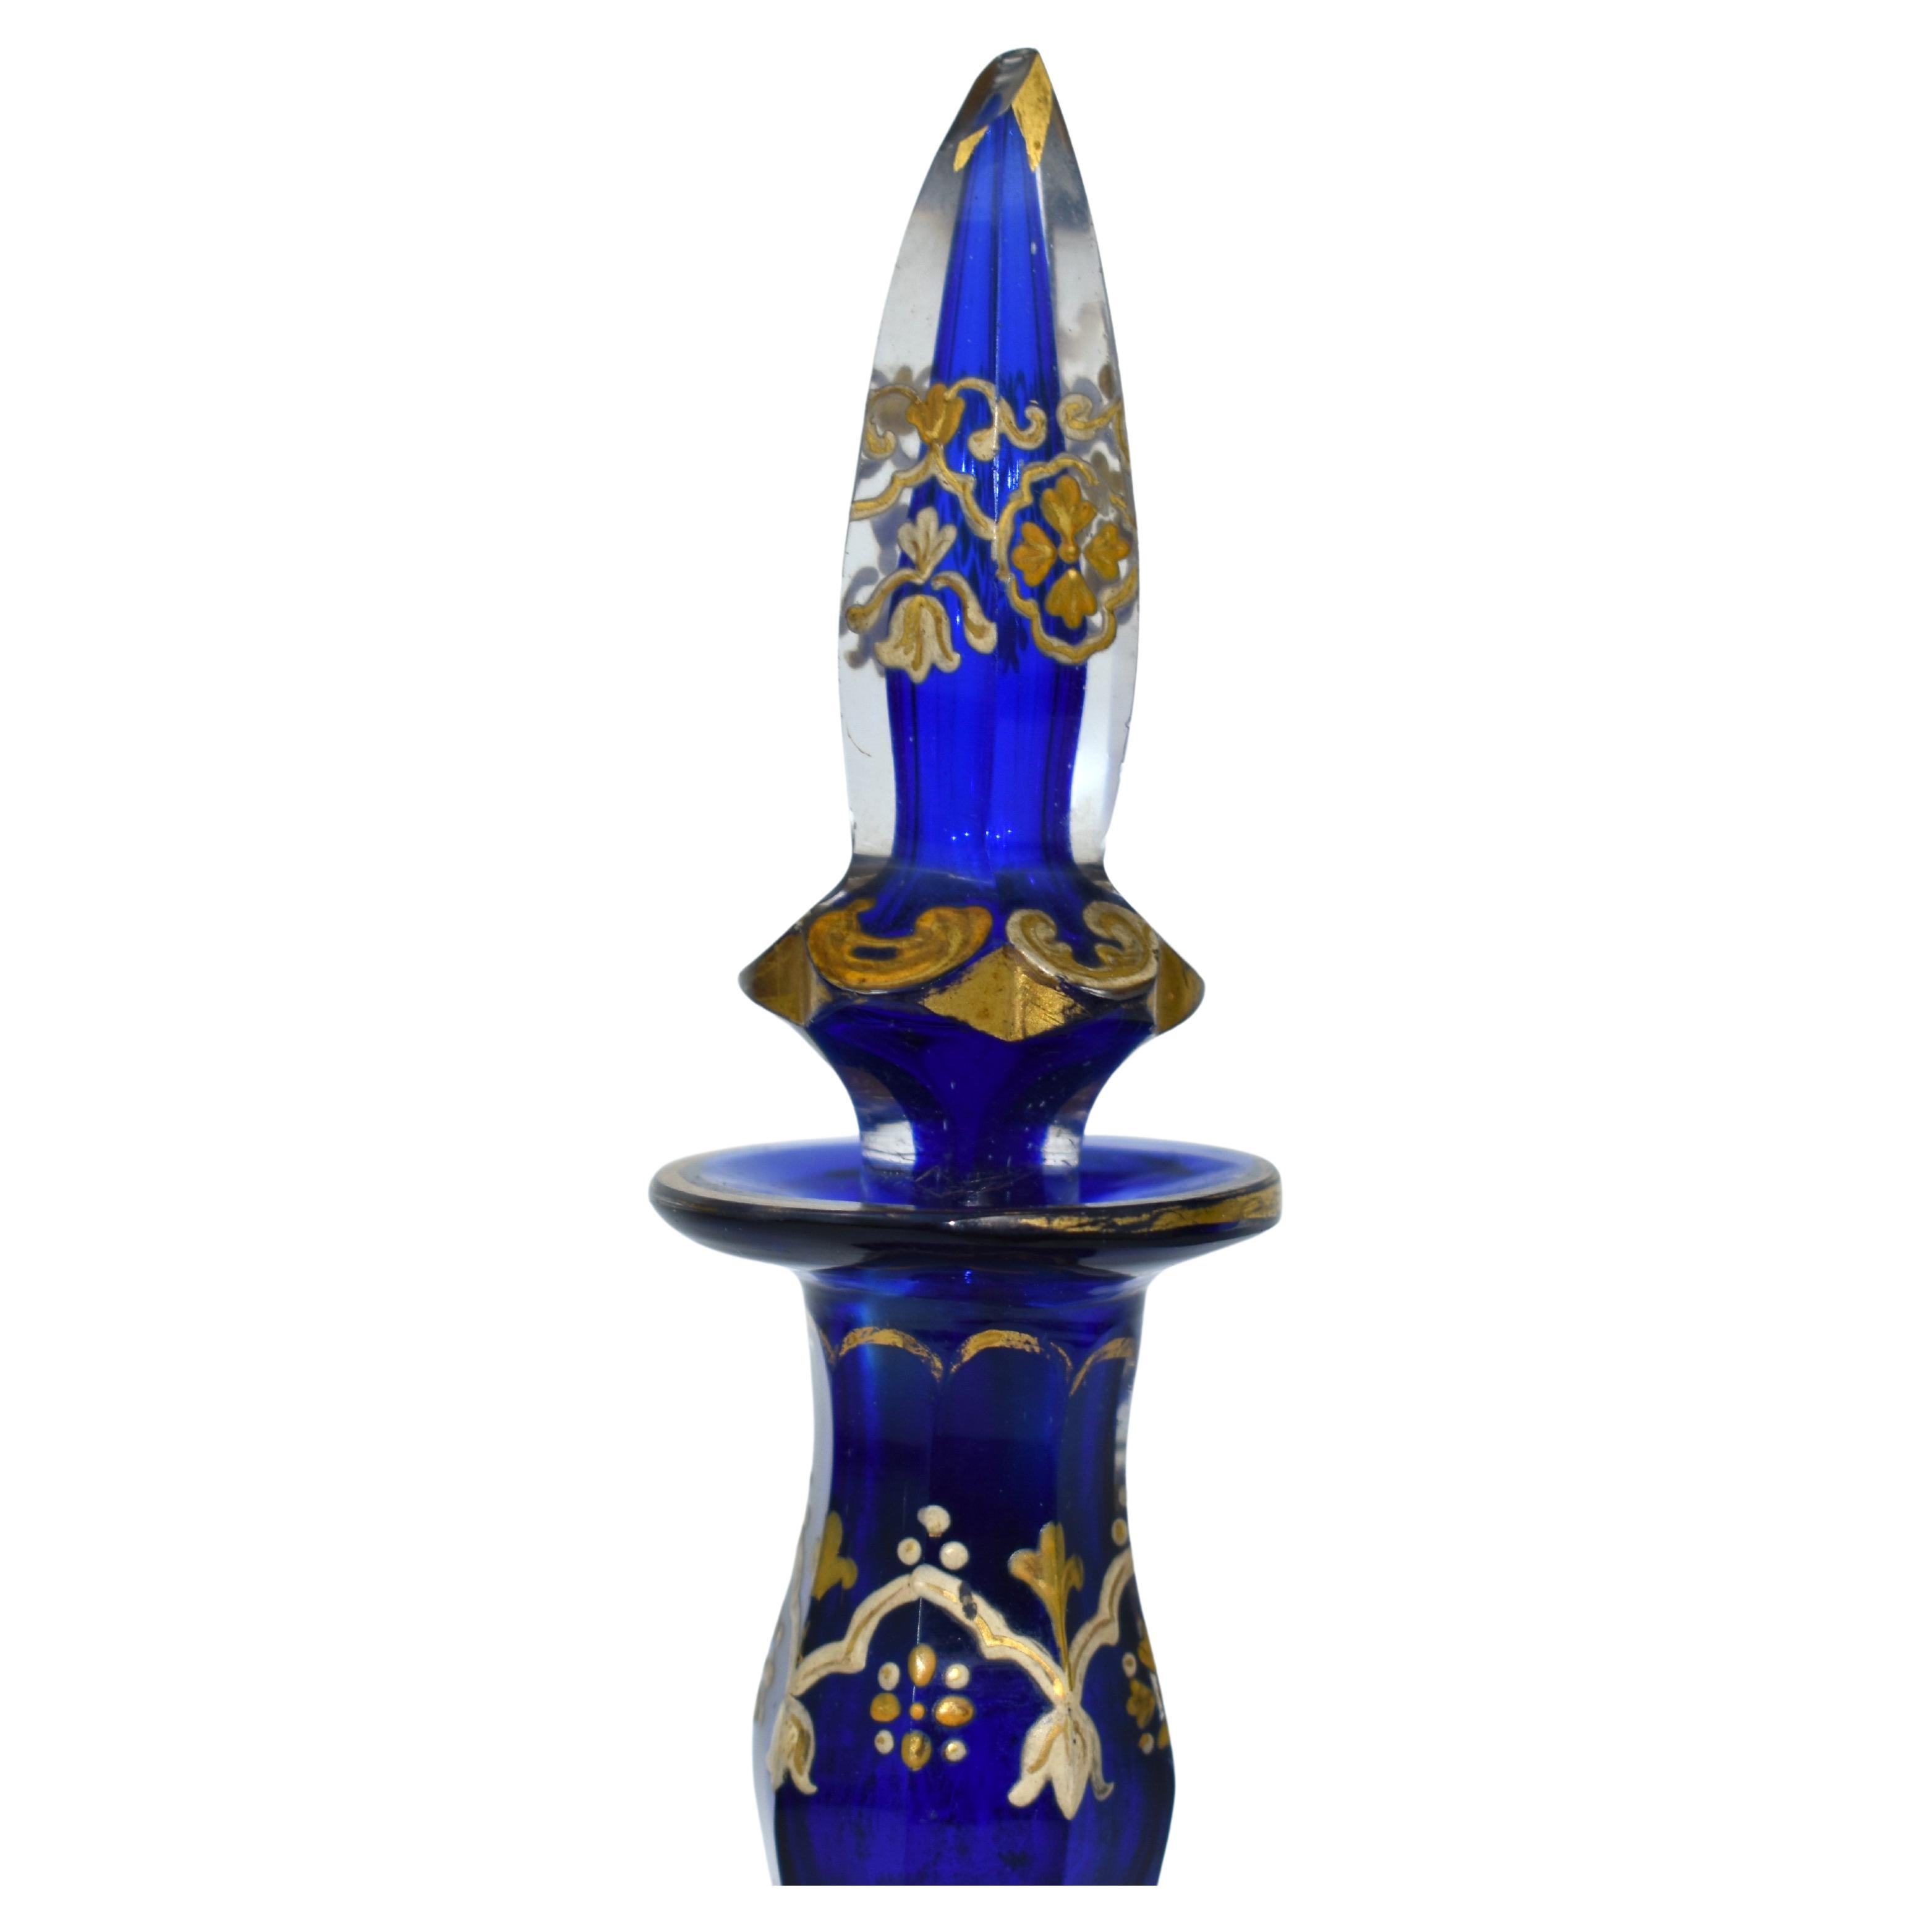 Antique Bohemian Cobalt Blue Cut-Glass Perfume Bottle, Decanter, 19th Century In Good Condition For Sale In Rostock, MV